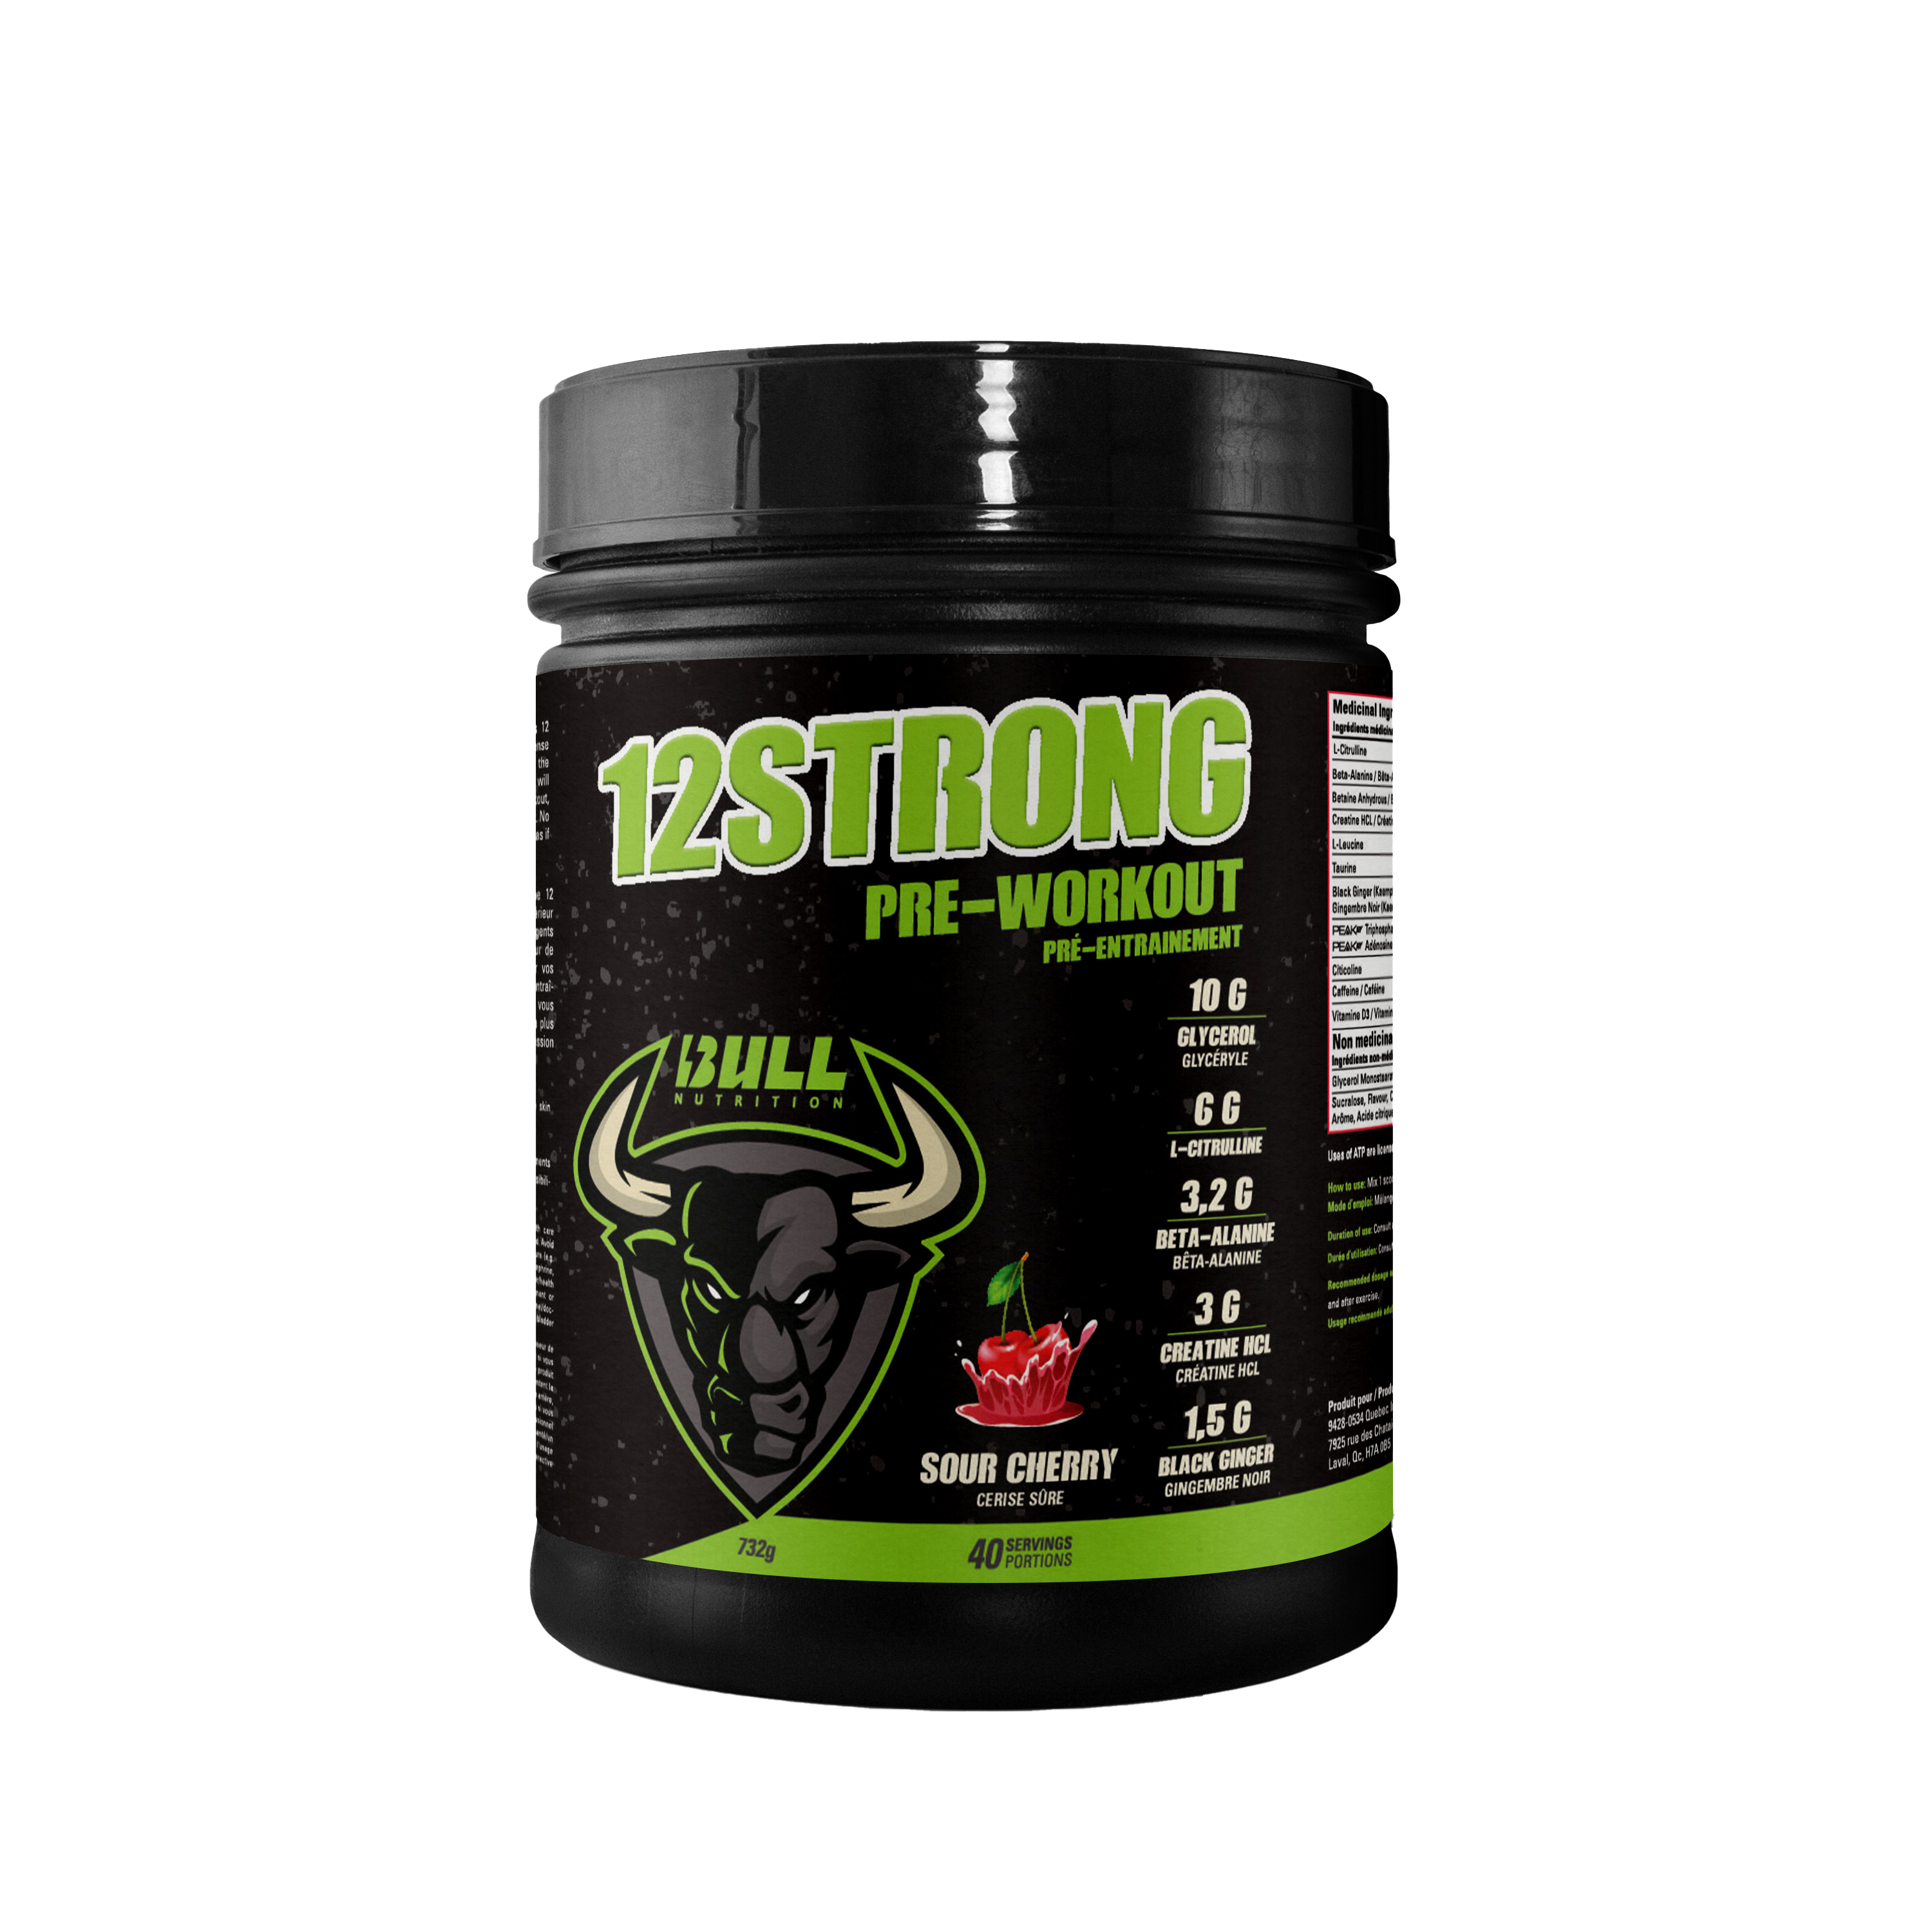 12 STRONG Pre-Workout – Sour Cherry